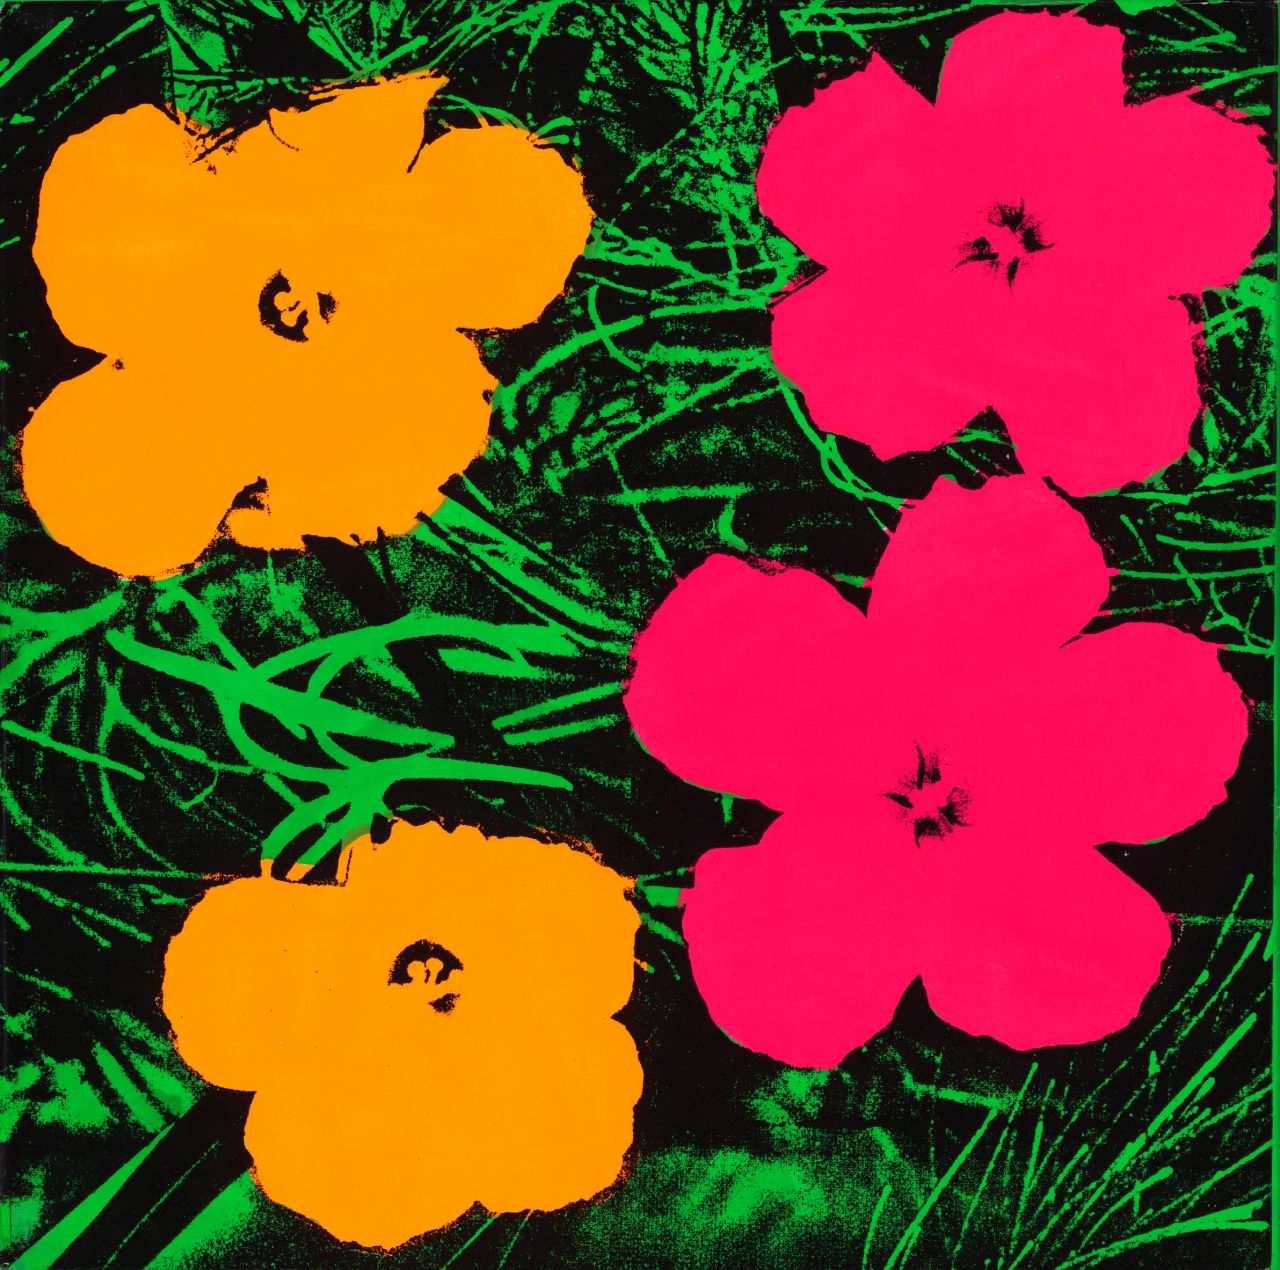 Andy Warhol's "Flowers" (1964), part of the Whitney's new Warhol retrospective.